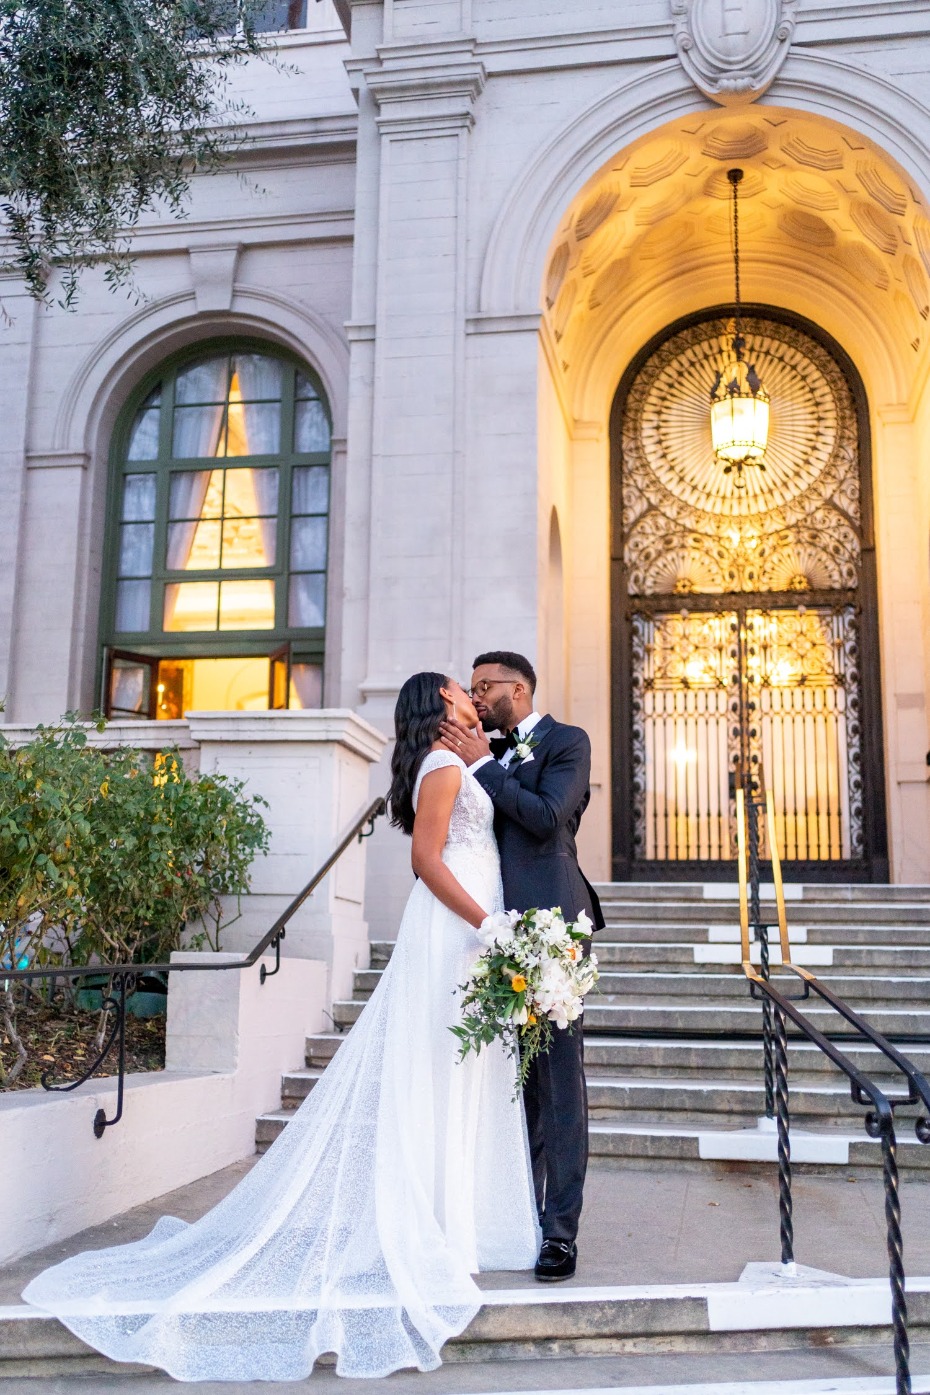 Hollywood Glamour Is the Name of the Game at This Los Angeles Wedding Venue